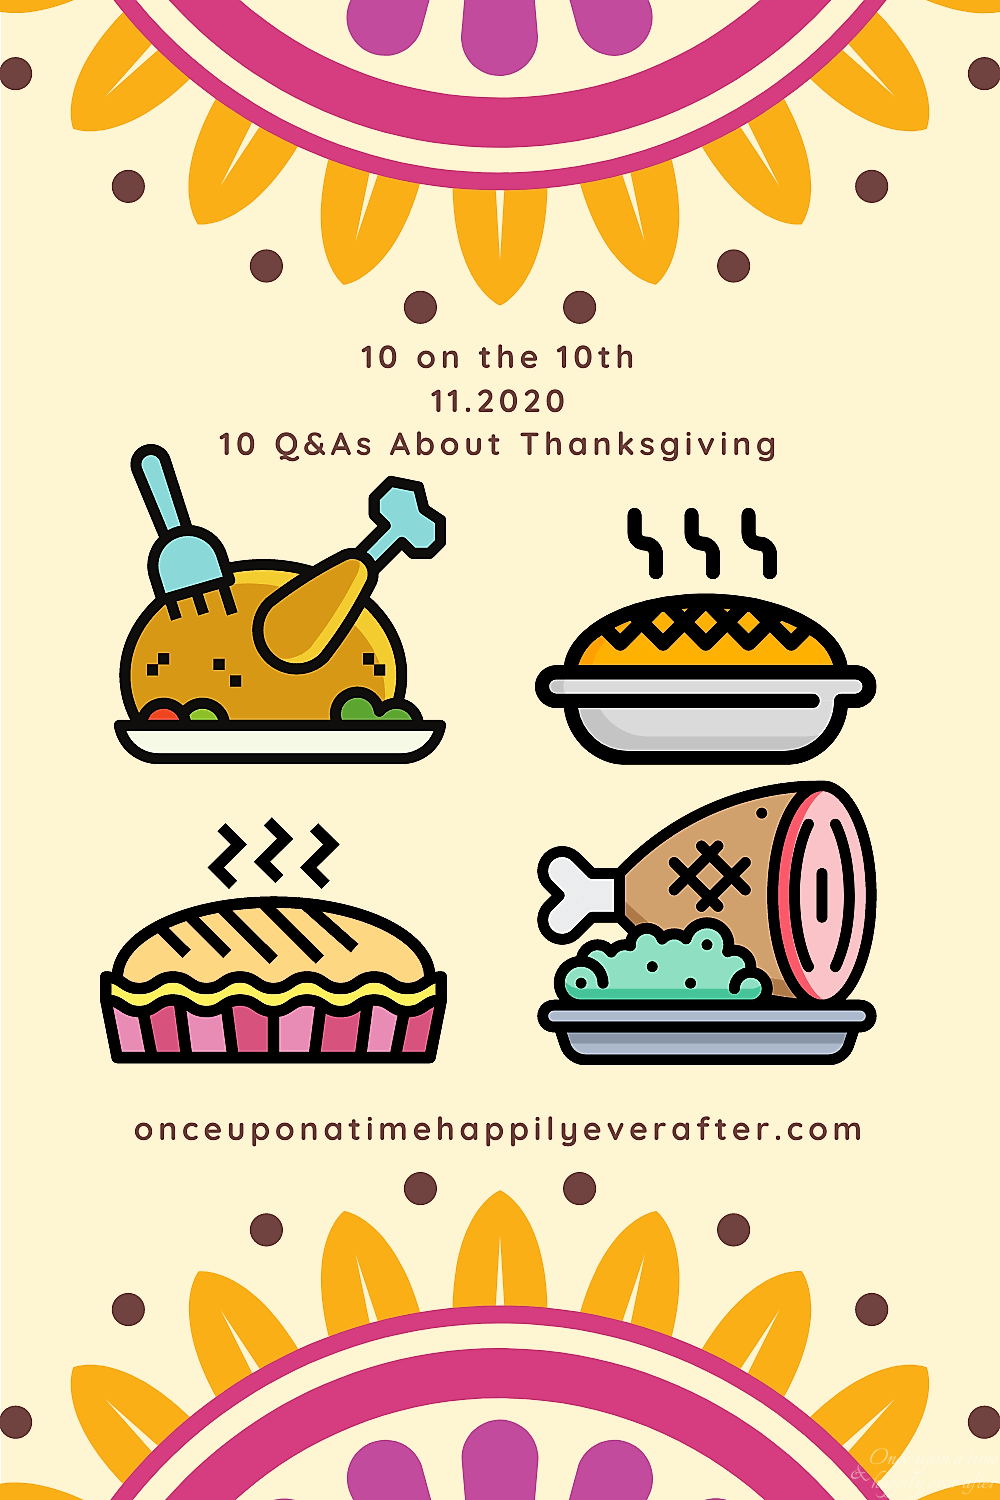 10 Questions about Thanksgiving: 10 on the 10th